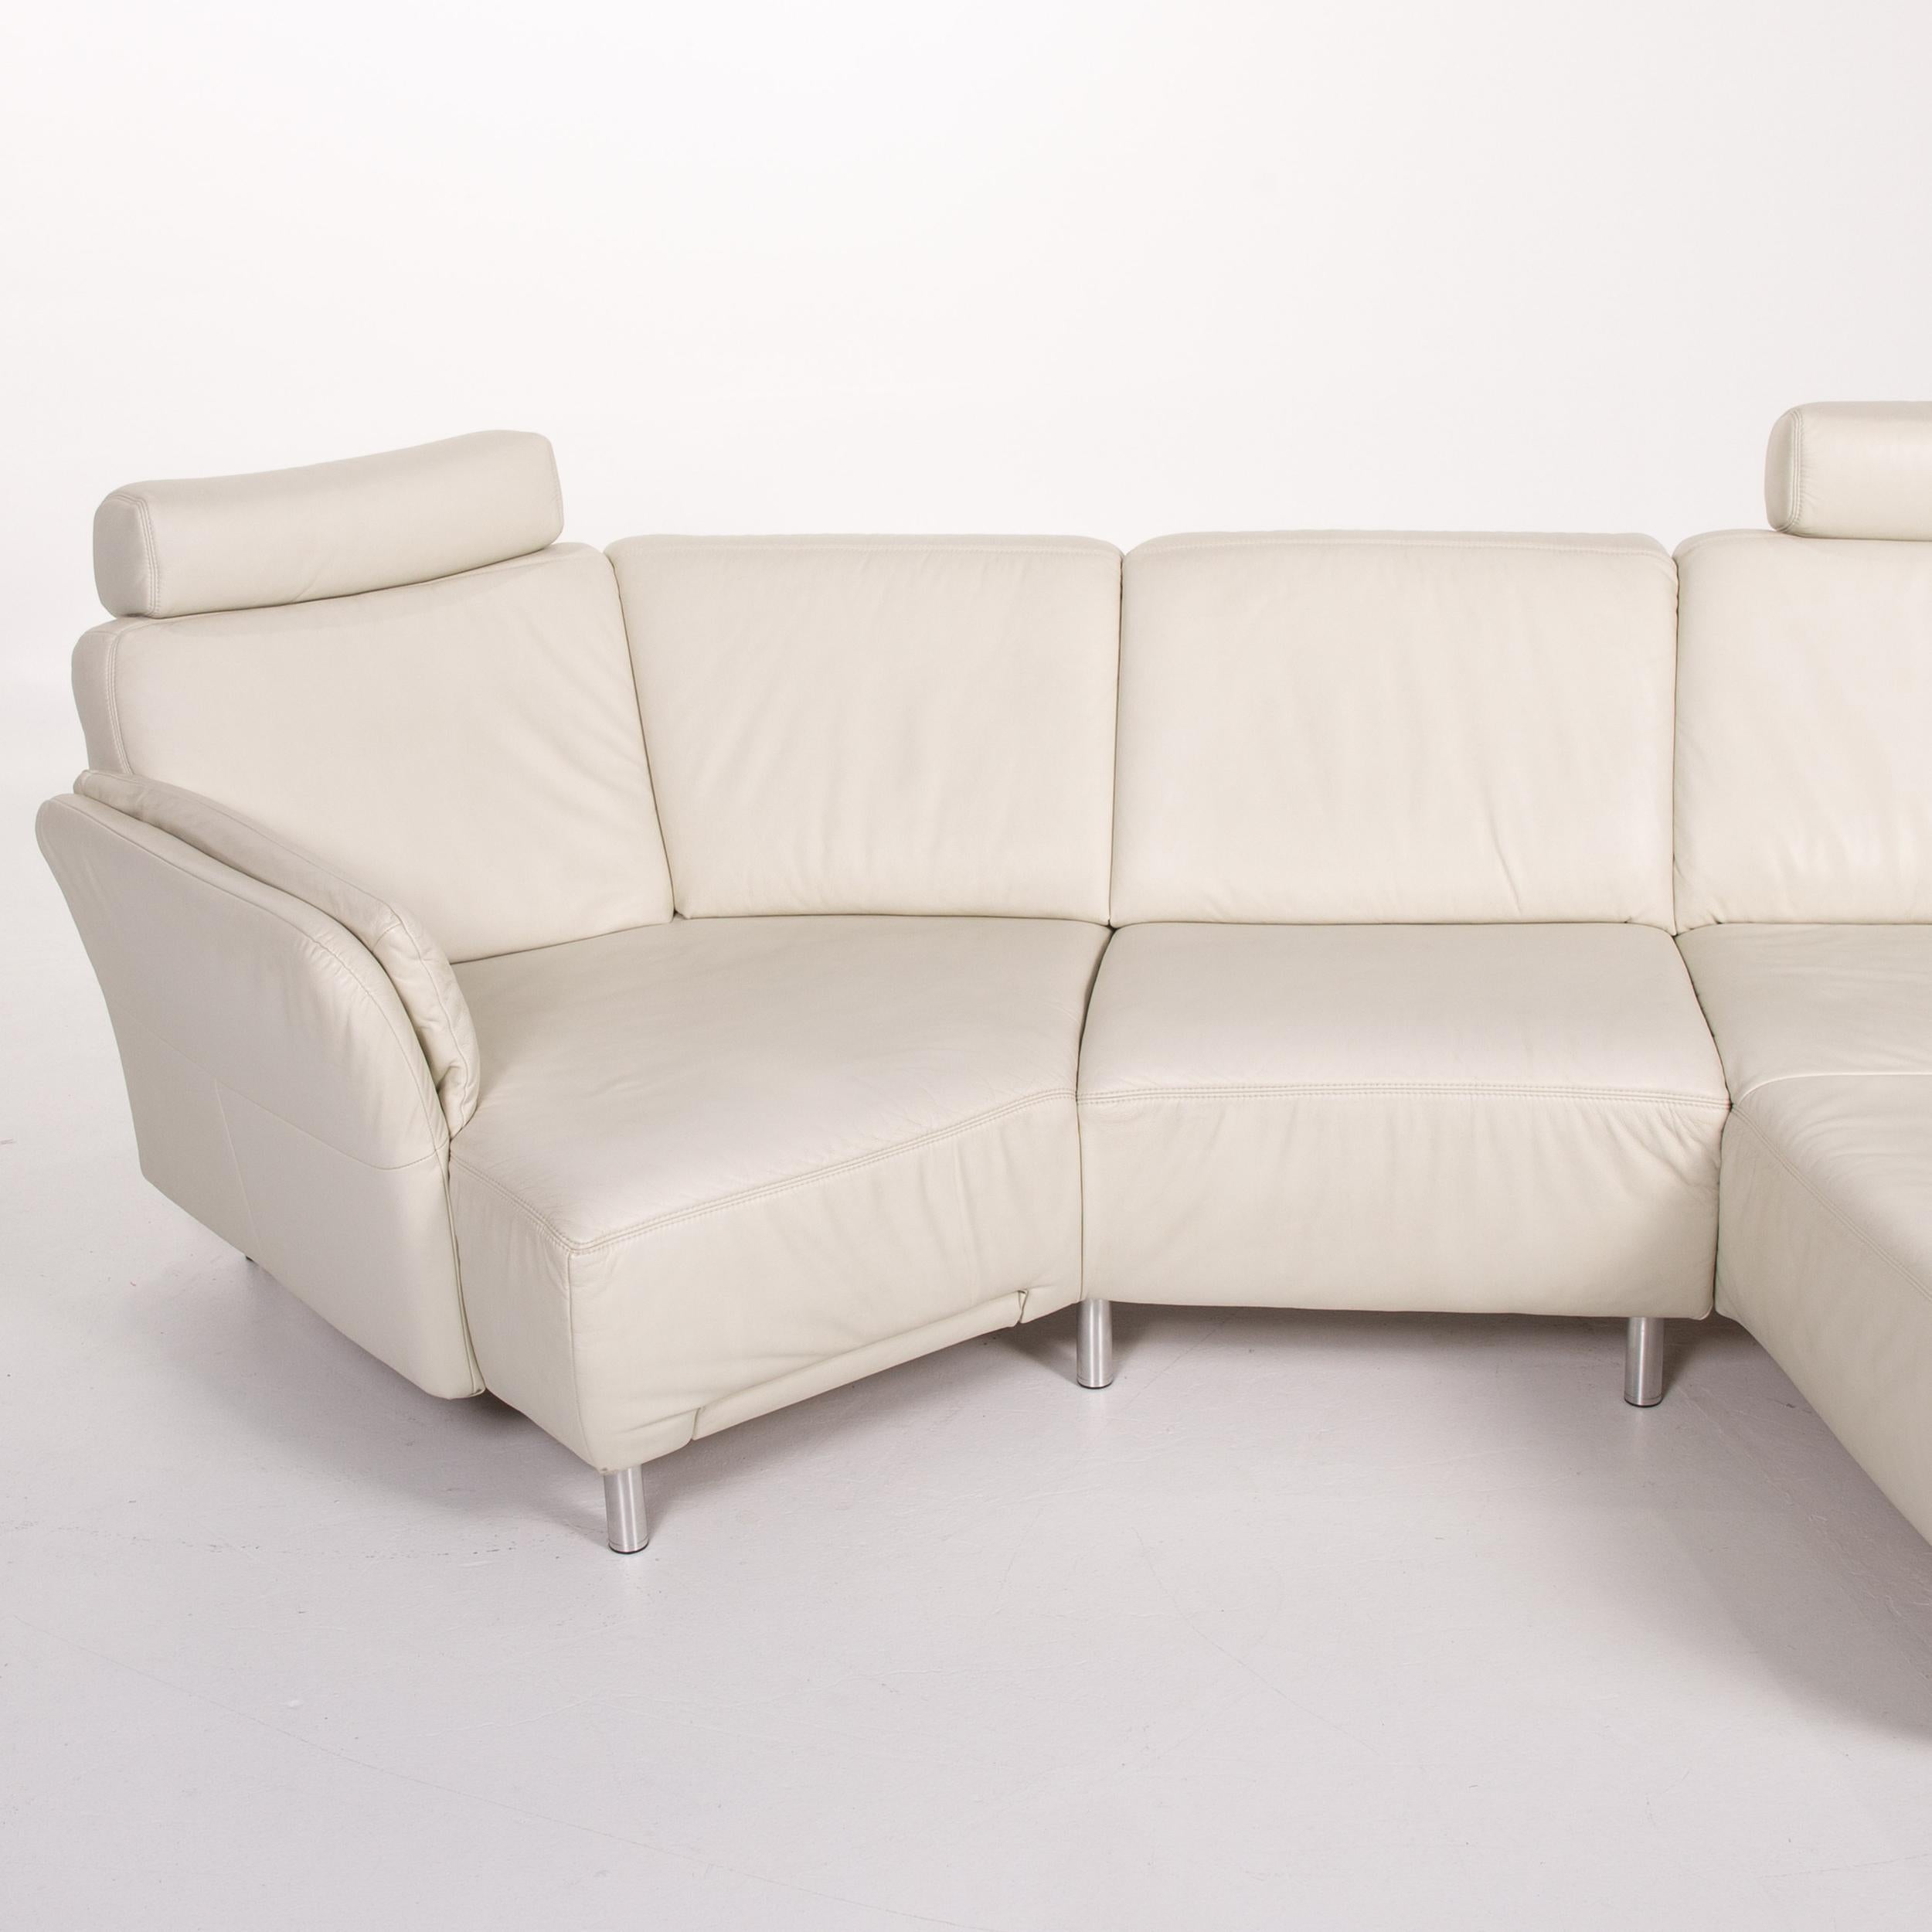 Sample Ring Leather Corner Sofa Cream Sofa Couch For Sale 5